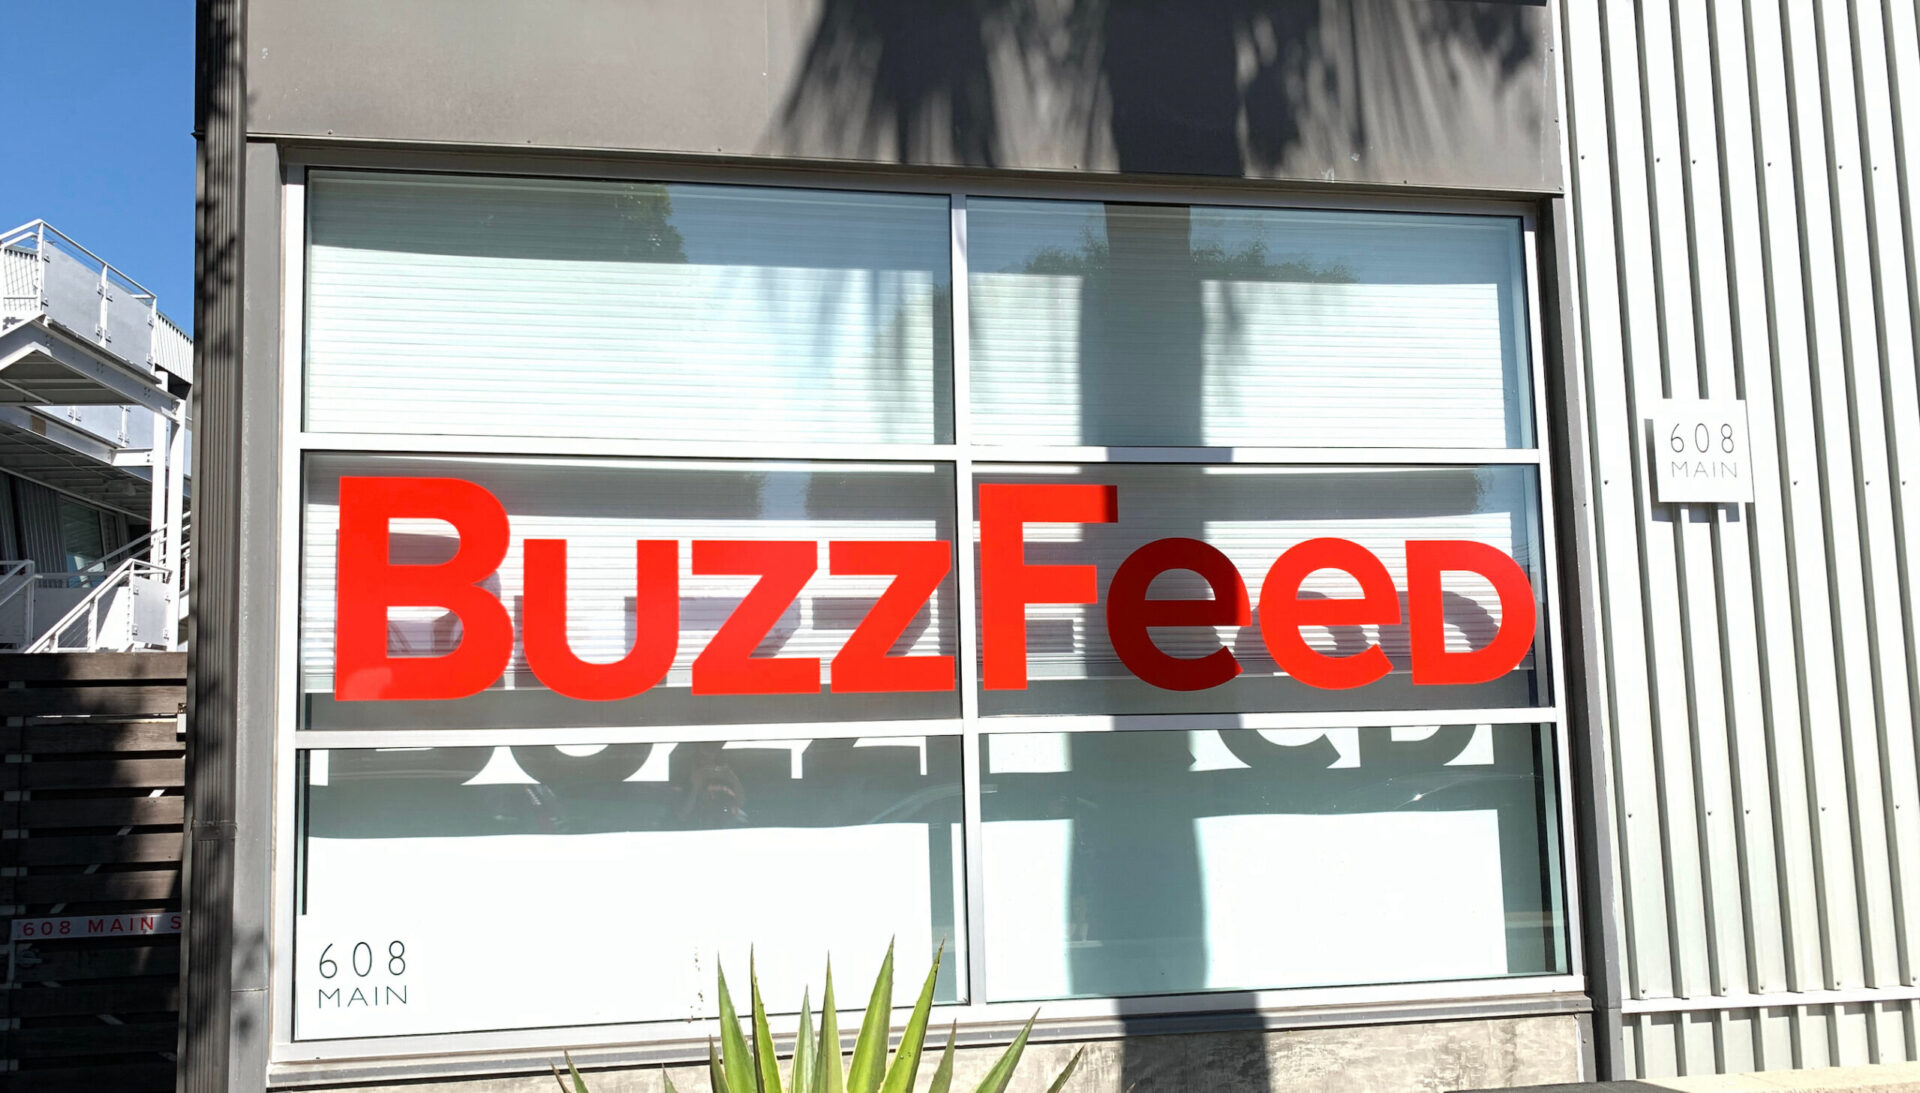 BuzzFeed News will be forced to shut down due to broader layoffs, CNN reported.